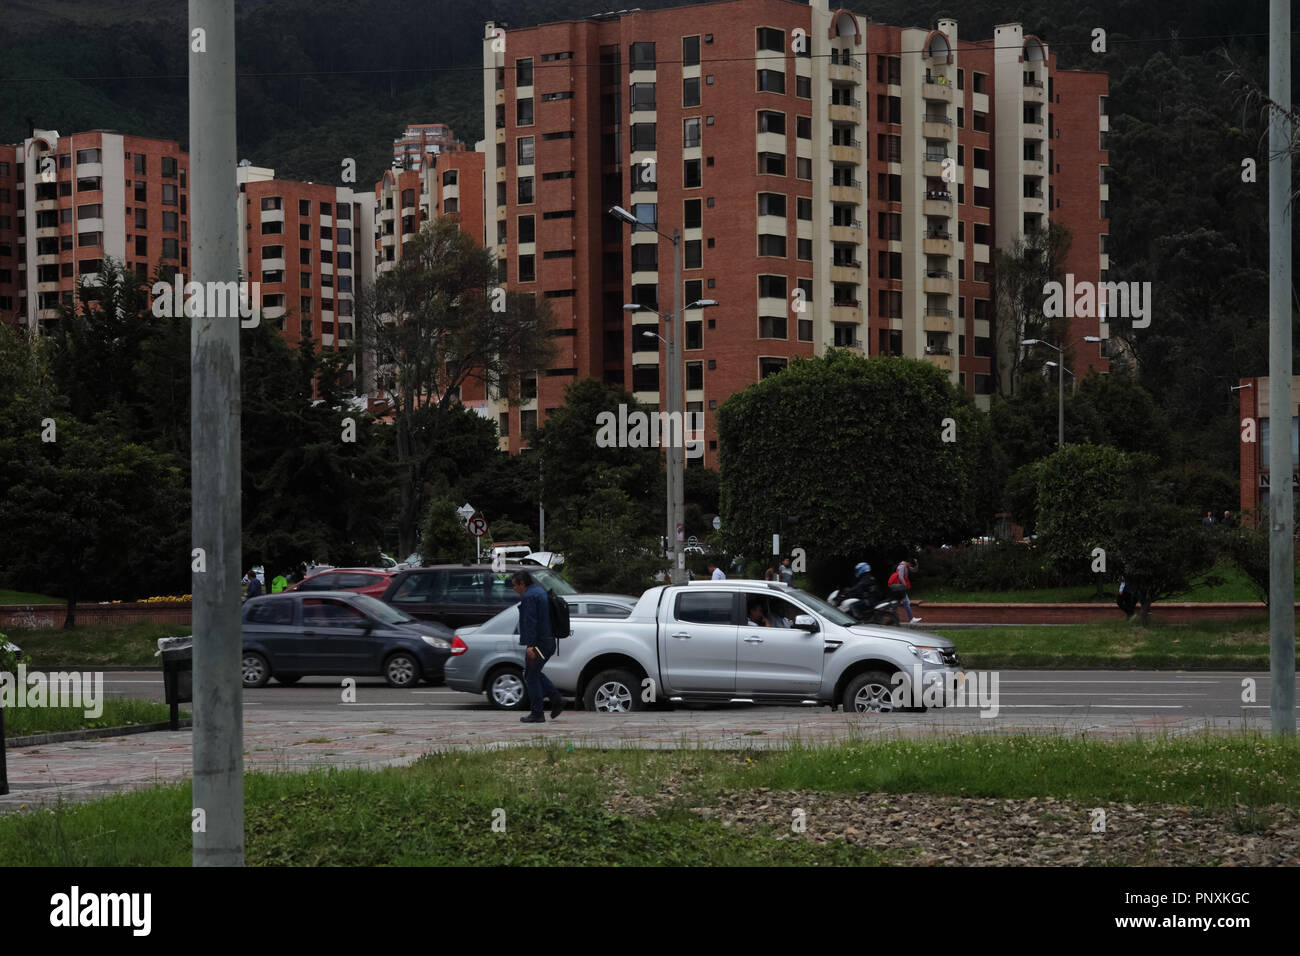 Bogota, Colombia - May 20, 2017: A section of Carrera Novena or translated, Avenue 9. In the background are apartment blocks. Stock Photo